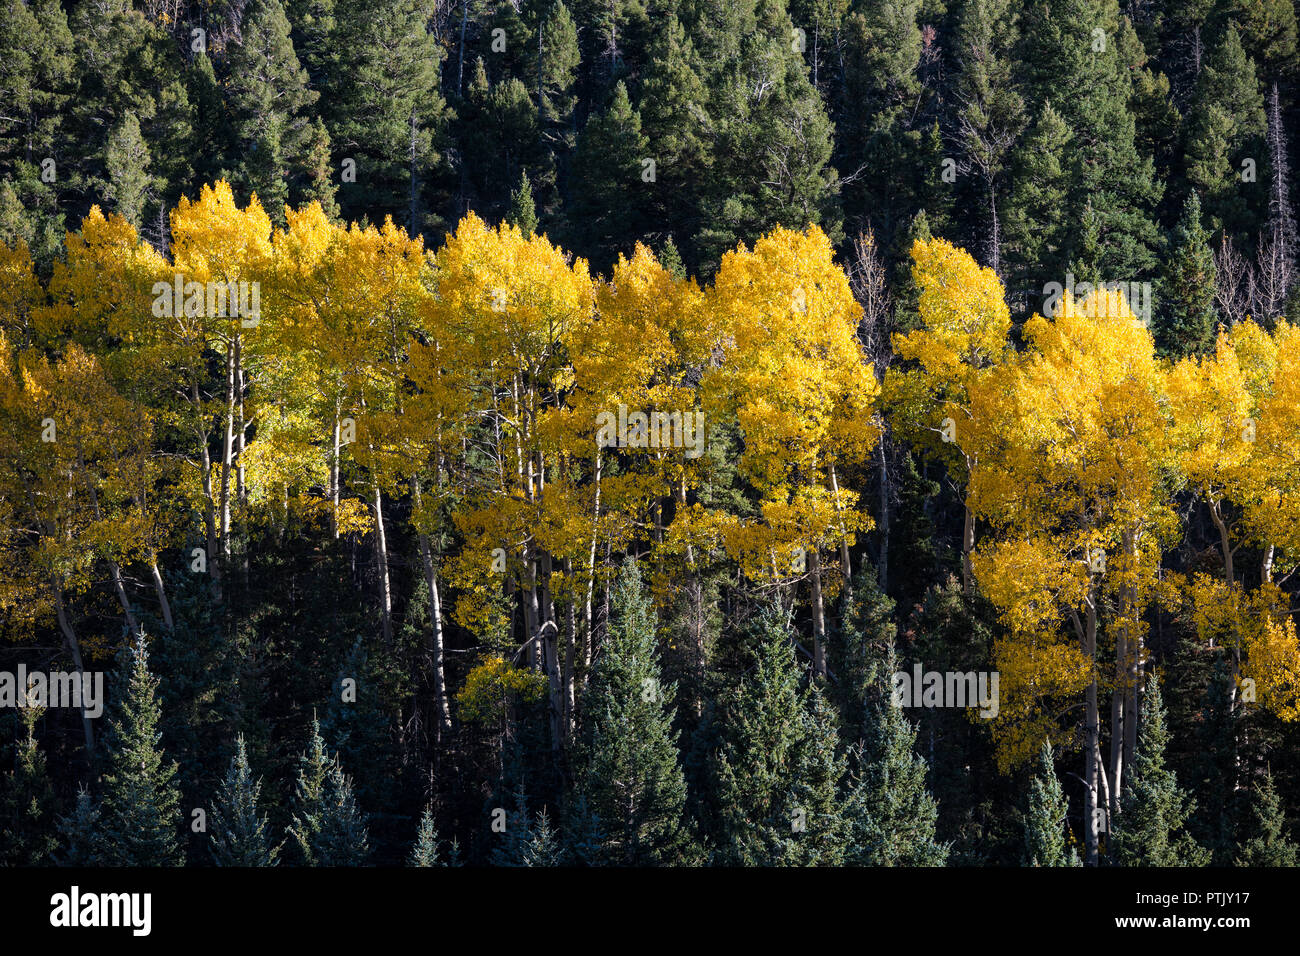 Aspen tree grove with autumn foliage in yellow, orange, and gold contrasted with the dark green foliage of a forest of pine, spruce, and fir trees Stock Photo